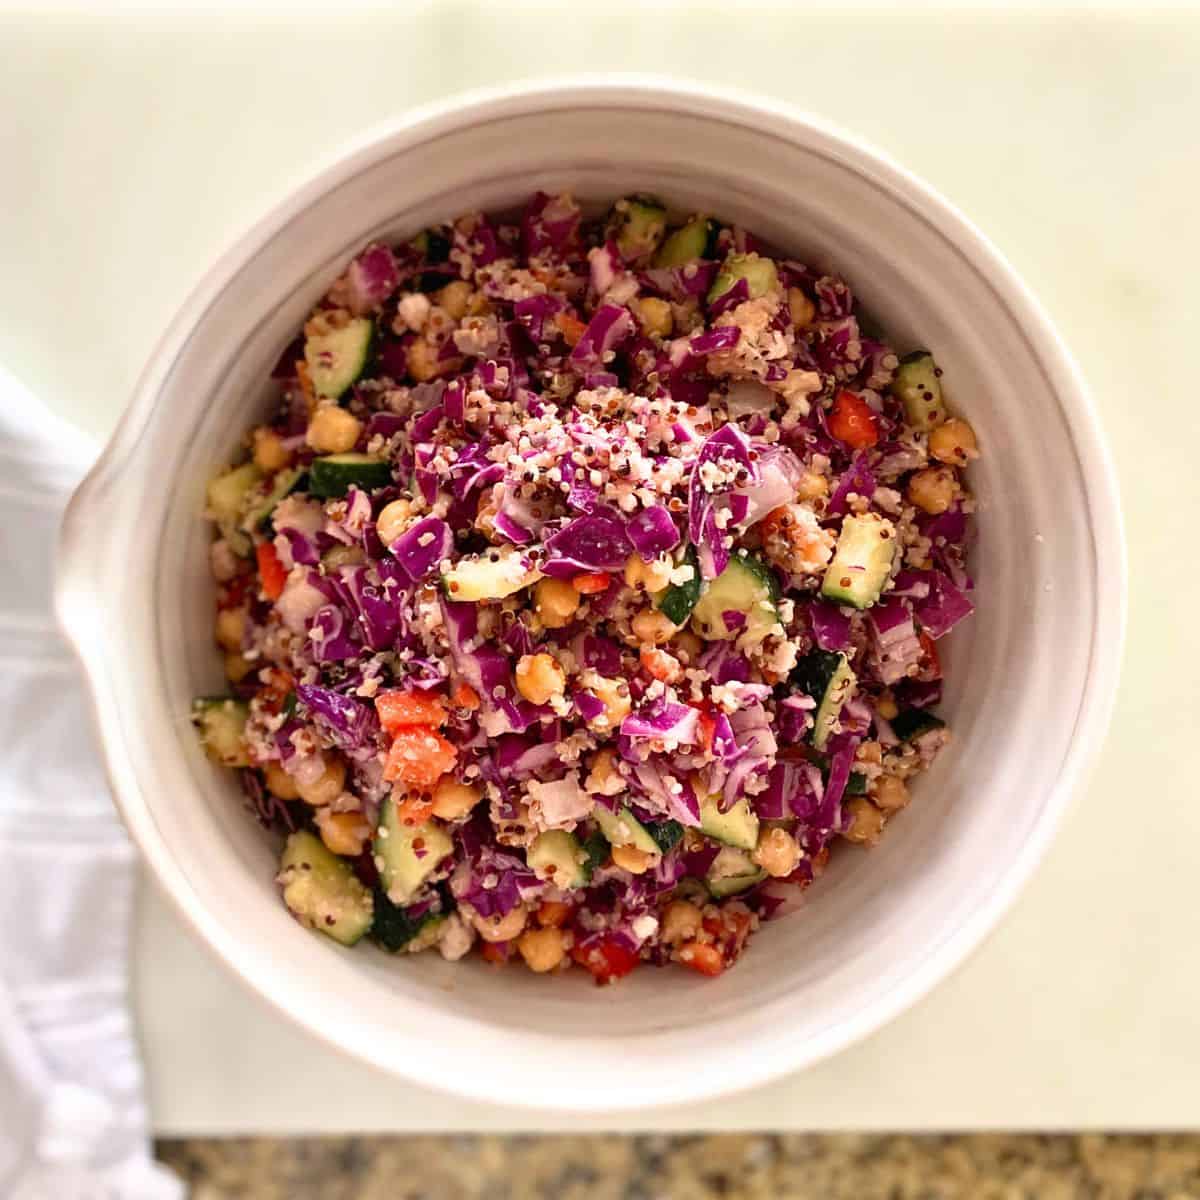 Quinoa salad mixed together in a hand thrown mixing bowl